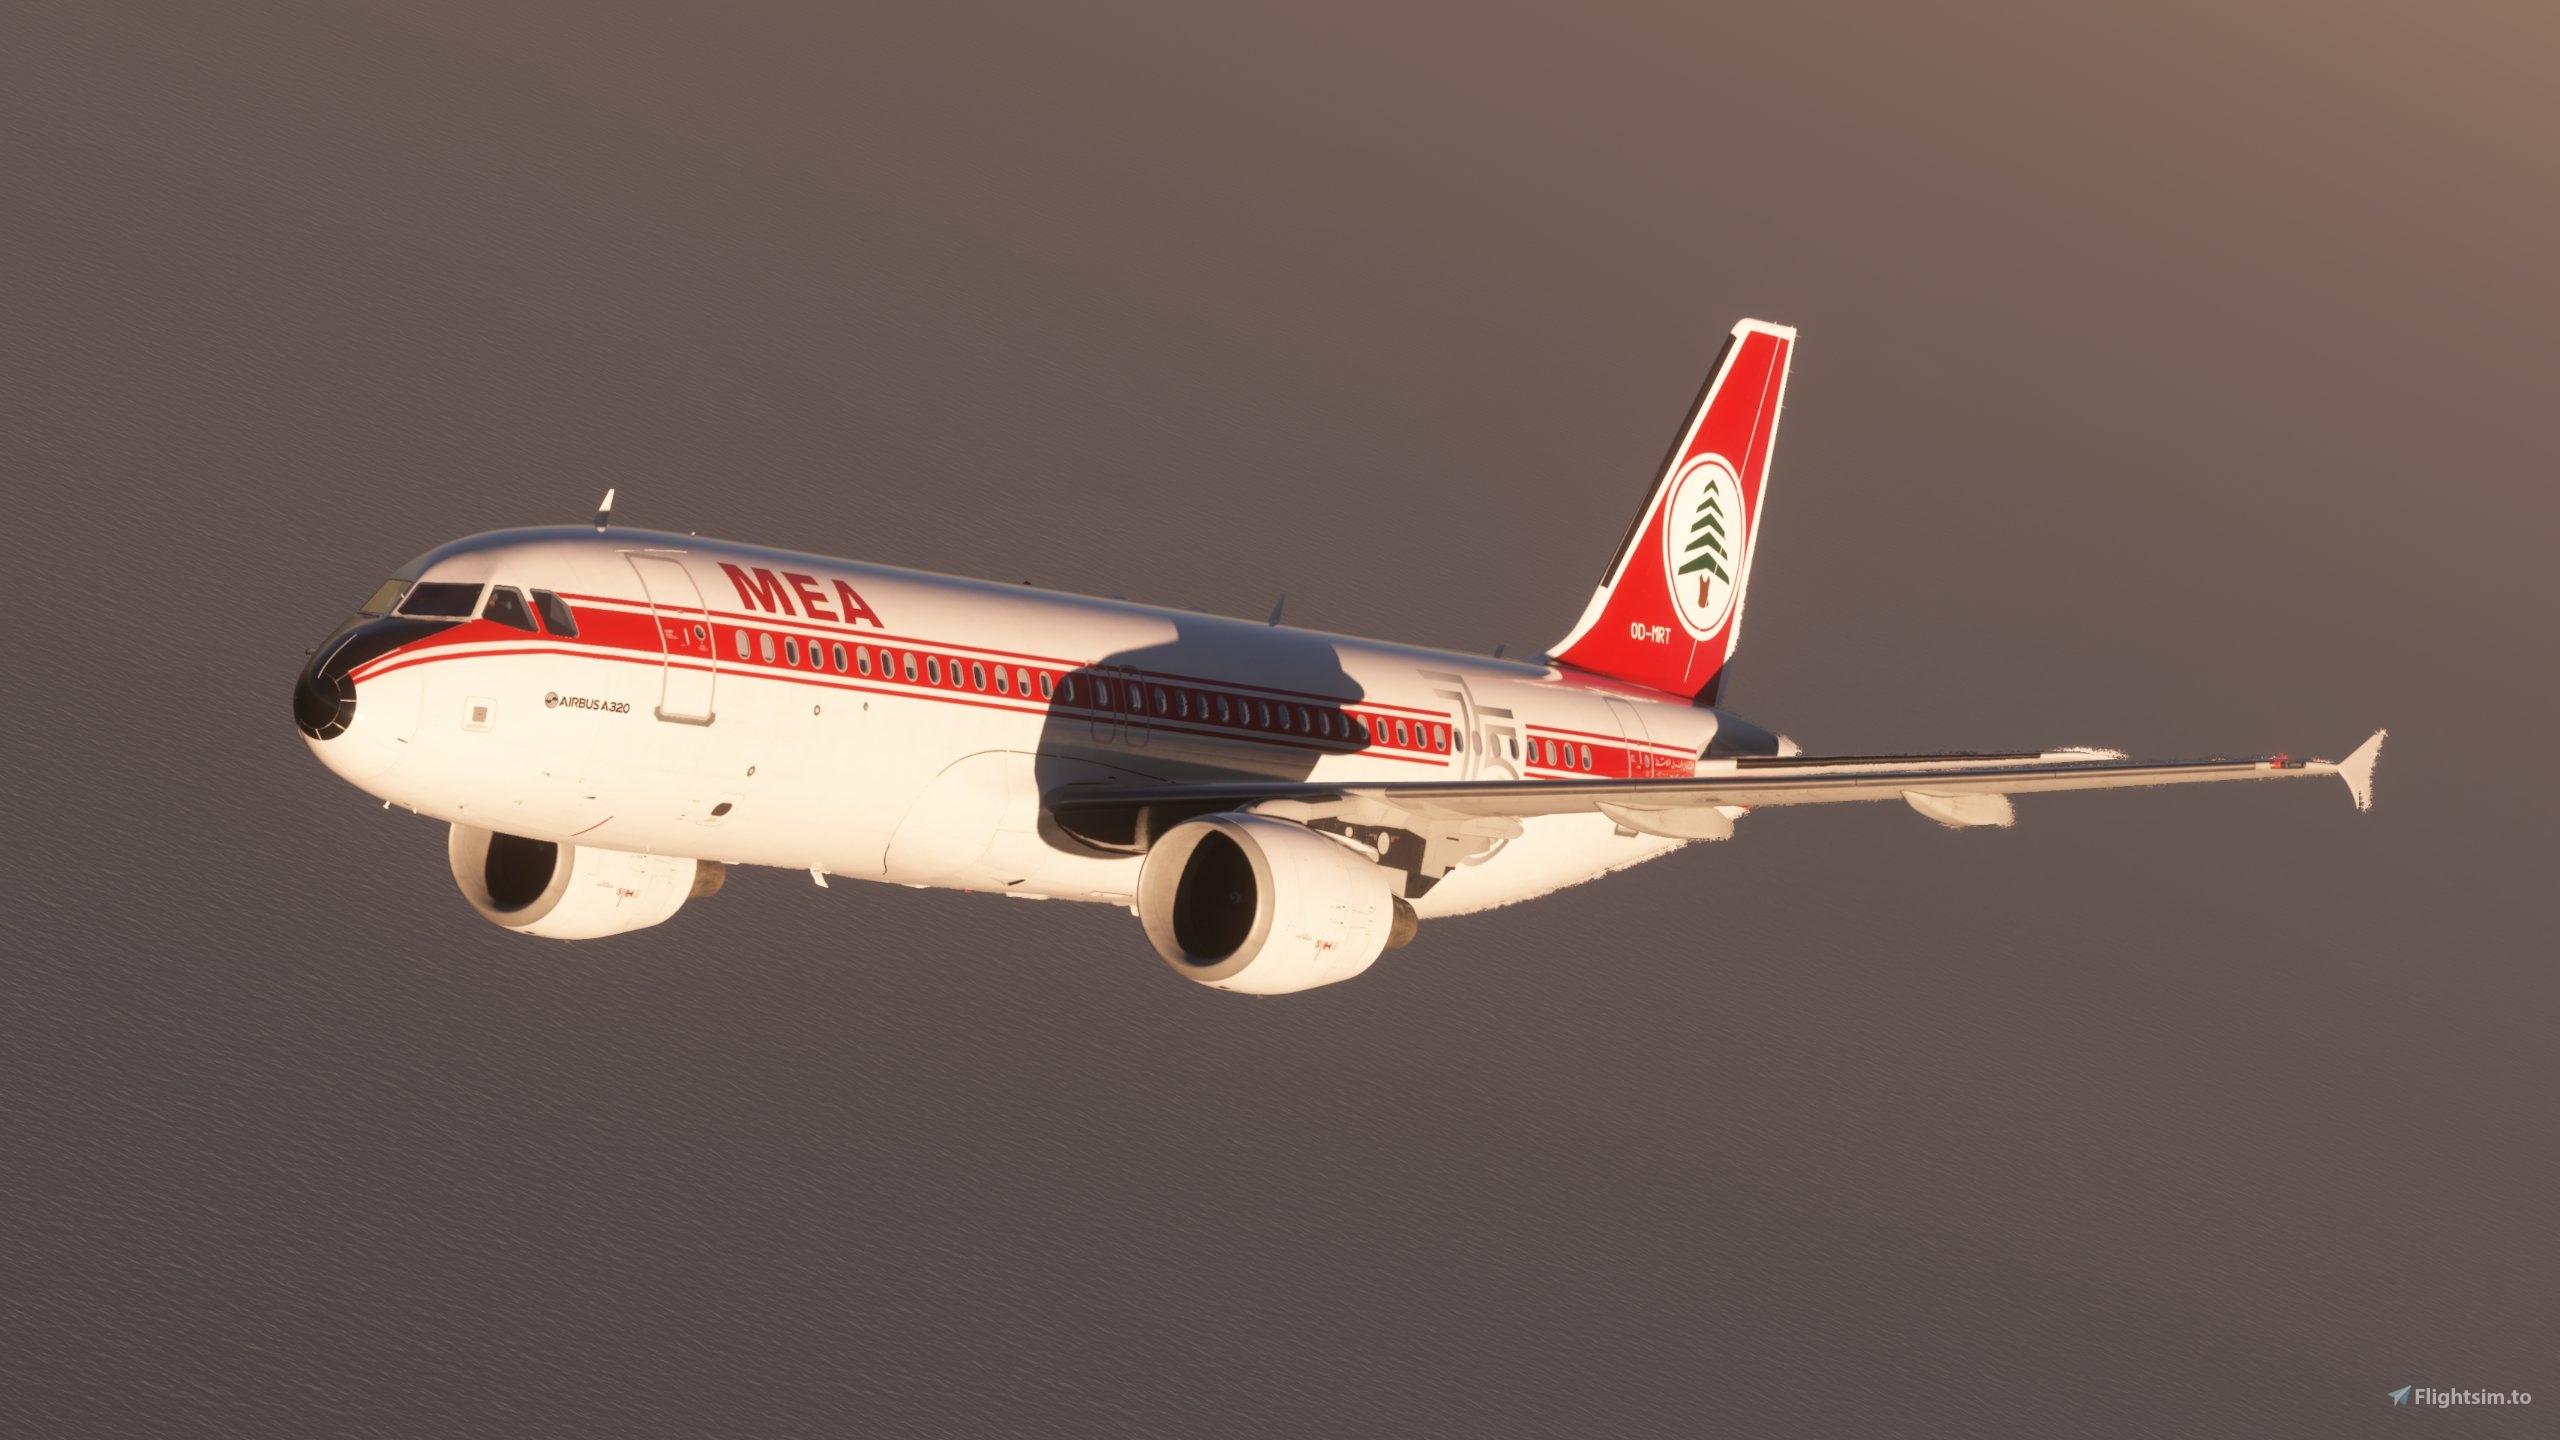 OD-MRT W/ANTENNA JC4464 1/400 MIDDLE EAST AIRLINES AIRBUS A320 RETRO LIVERY REG